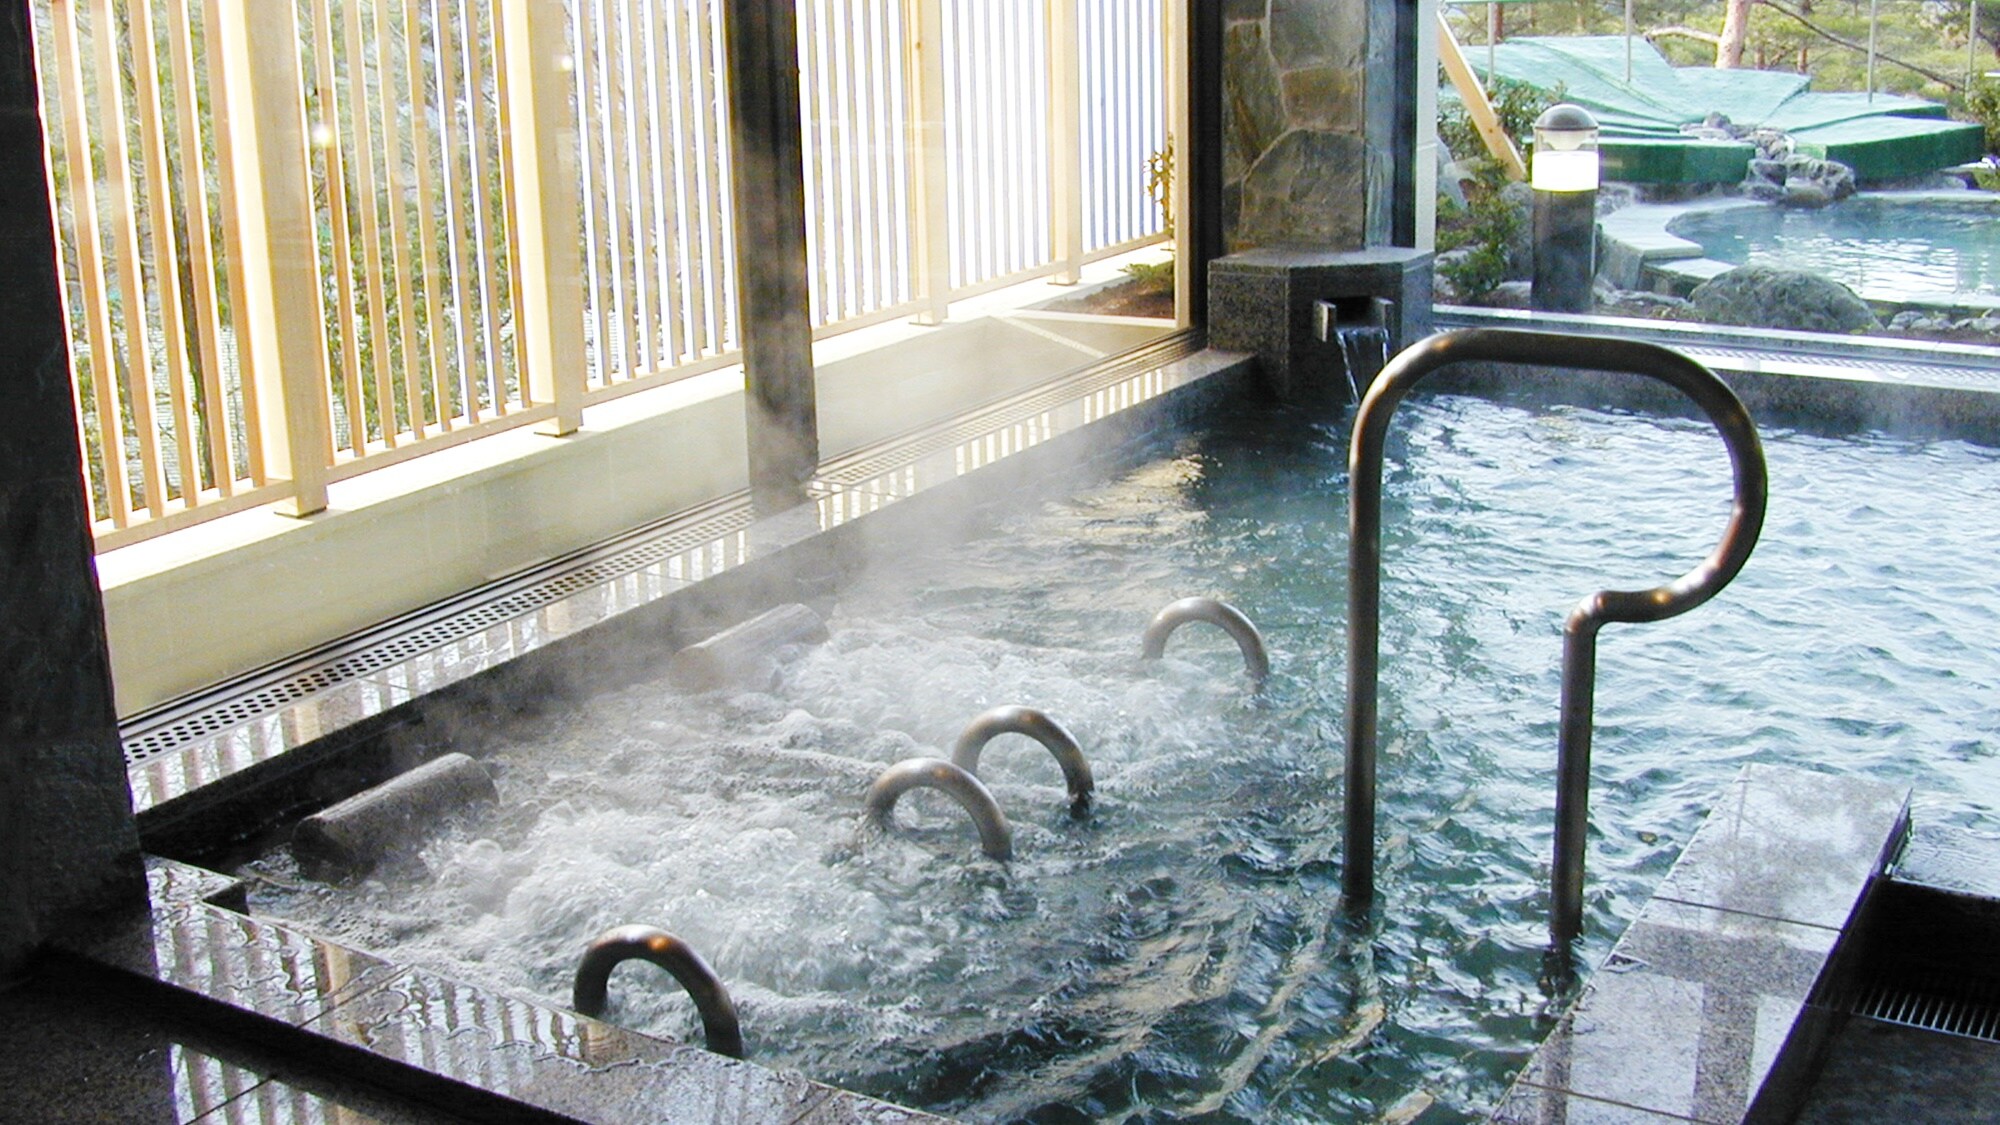 * Please enjoy the hot springs in the "bath zone" on the premises.